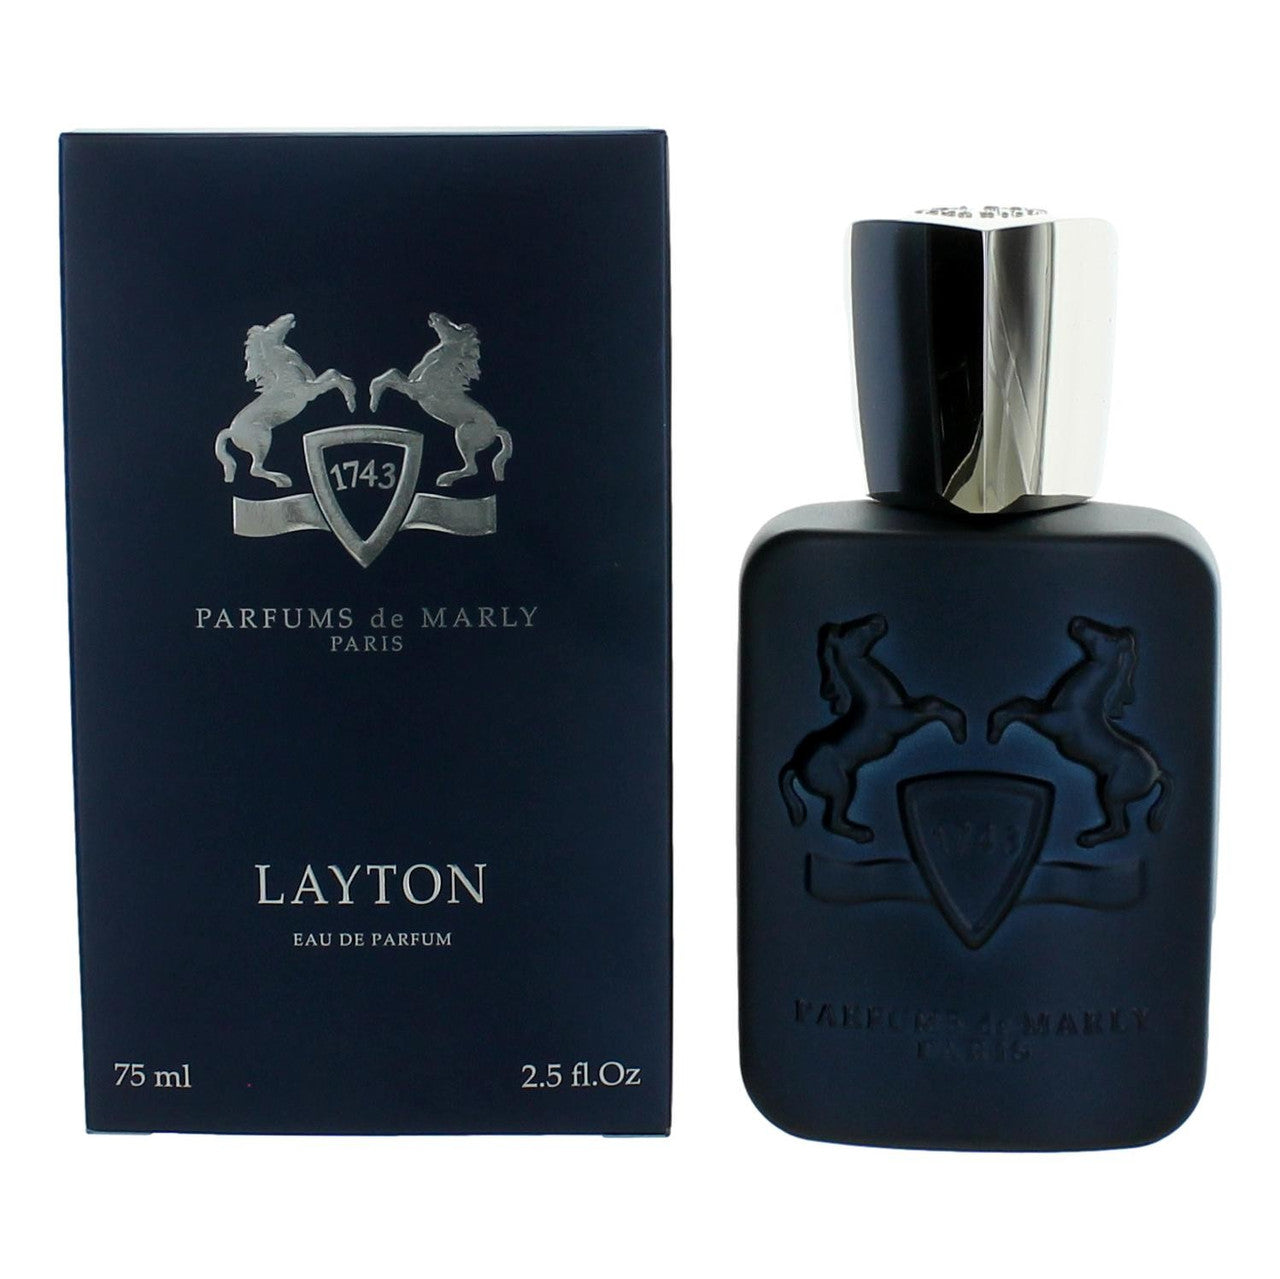 2.5 oz bottle of parfums de marly layton cologne and packaging